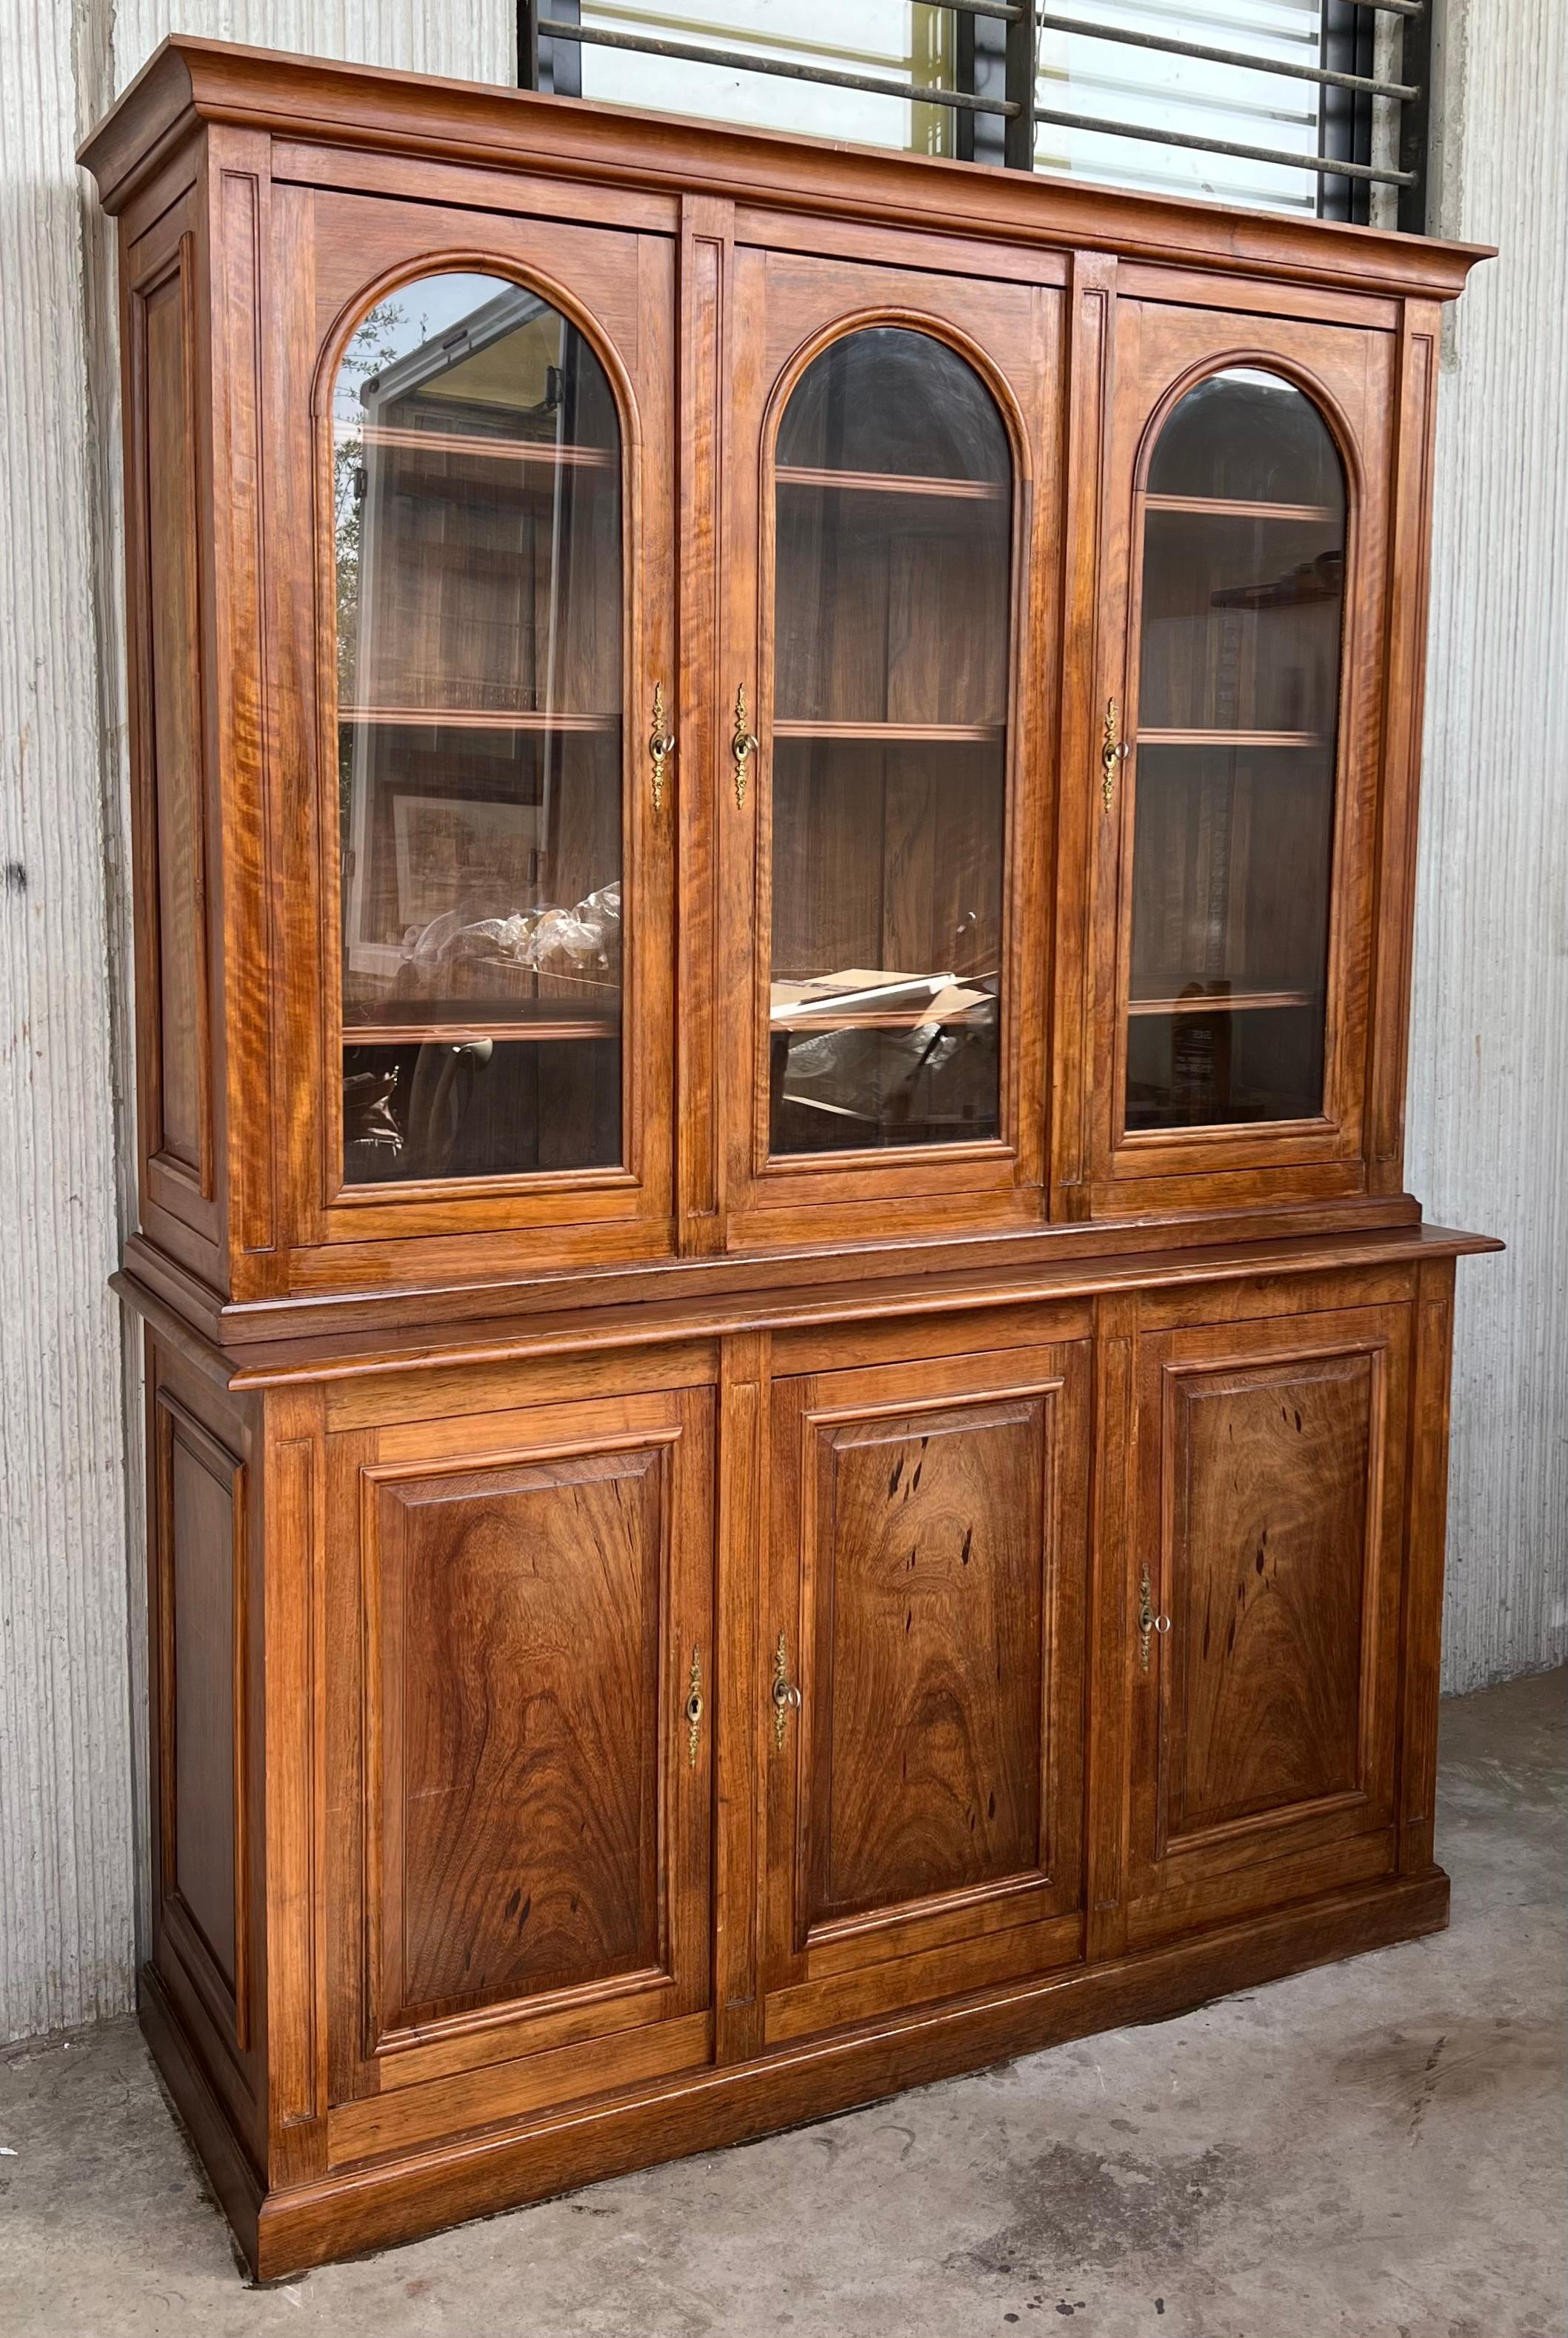 arched bookcase with glass doors